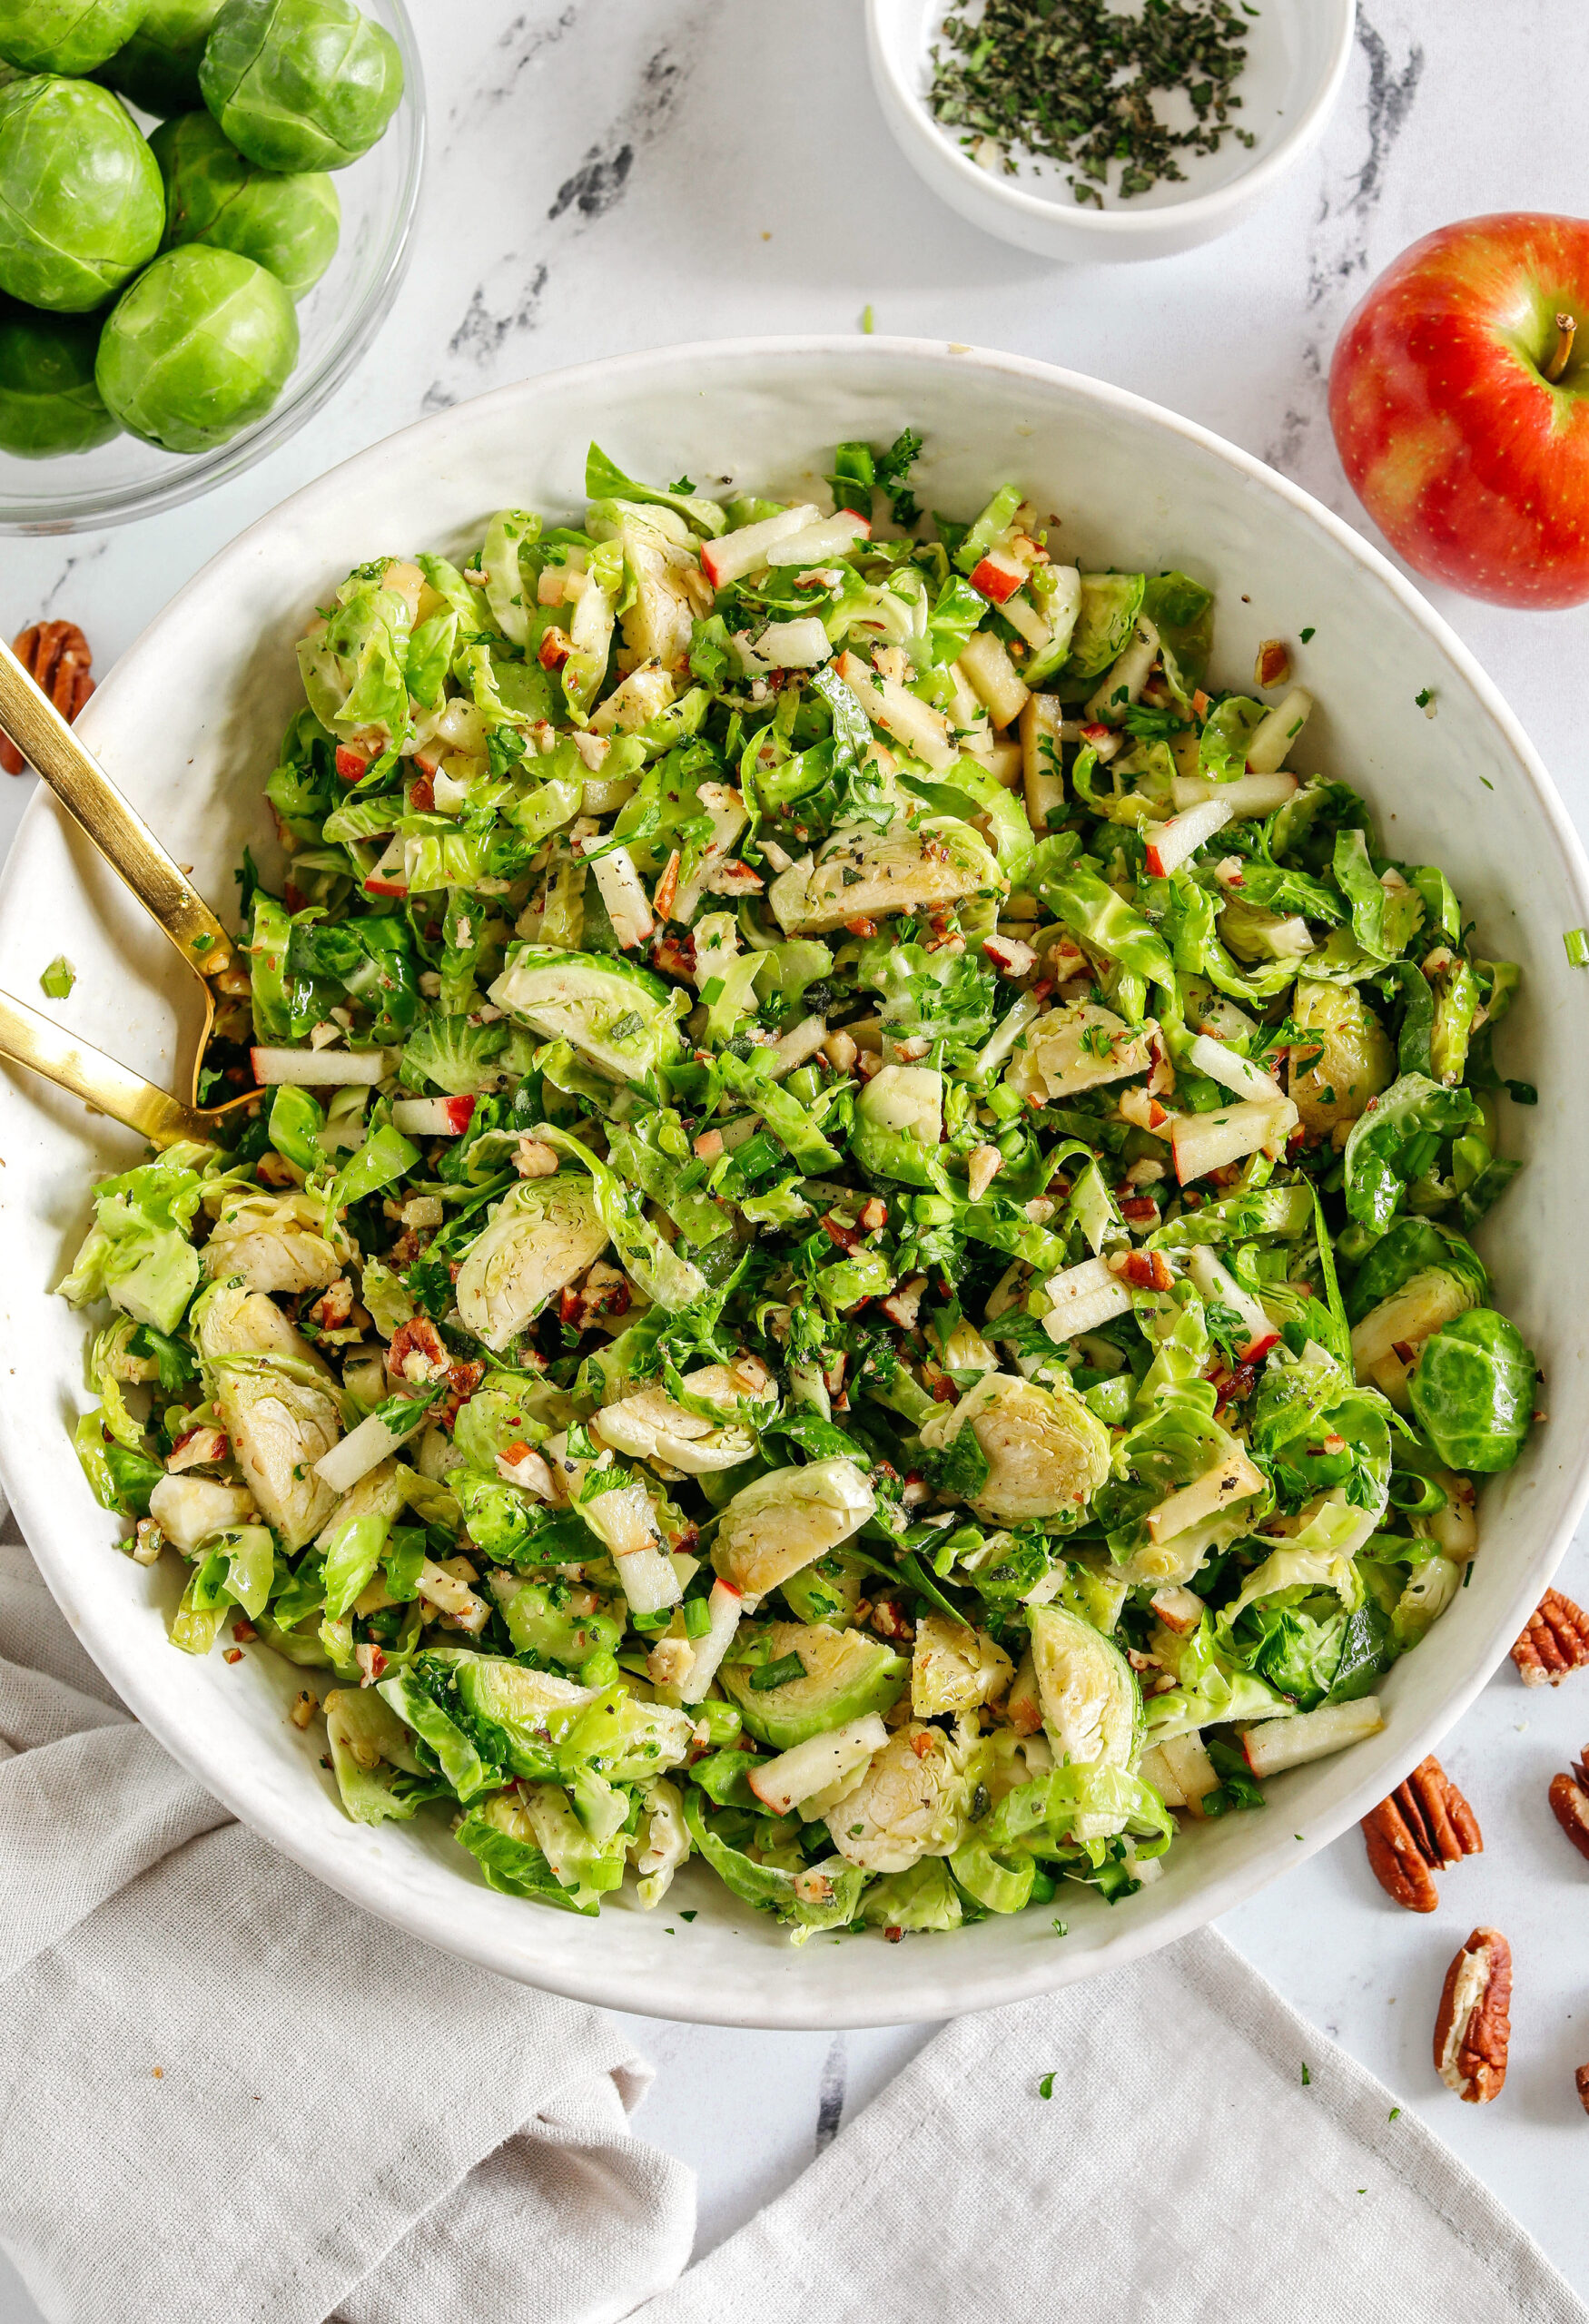 The most delicious Fall Brussels Sprout Salad made with shaved brussels sprouts, chopped apples and crunchy pecans all tossed with a maple dijon dressing!  This salad makes a great side dish for the holidays or everyday meals.